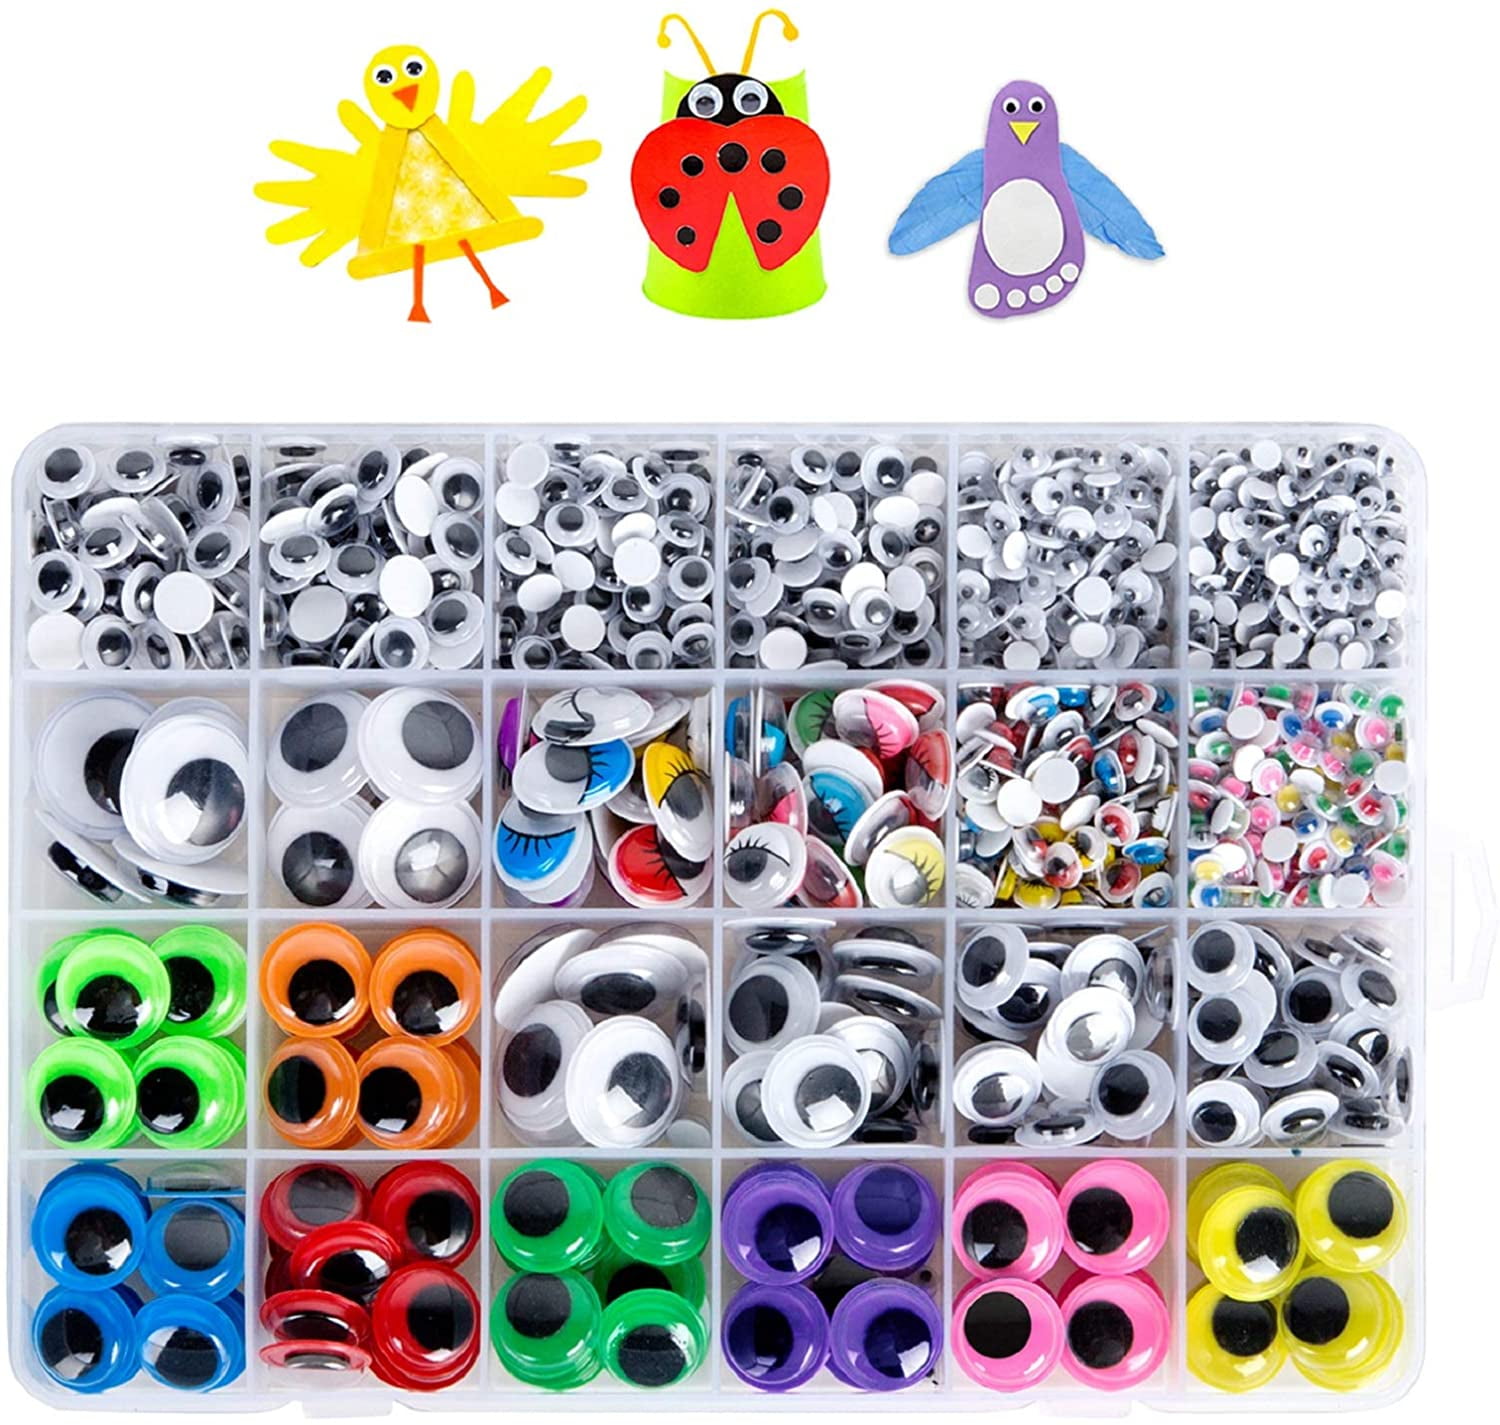 800pcs/box Self-Adhesive Wiggly Googly Doll Eyes for DIY Crafts Toy  Handmade Scrapbooking Decor Craft Supplies 4/5/6/7/8/10/12mm - AliExpress